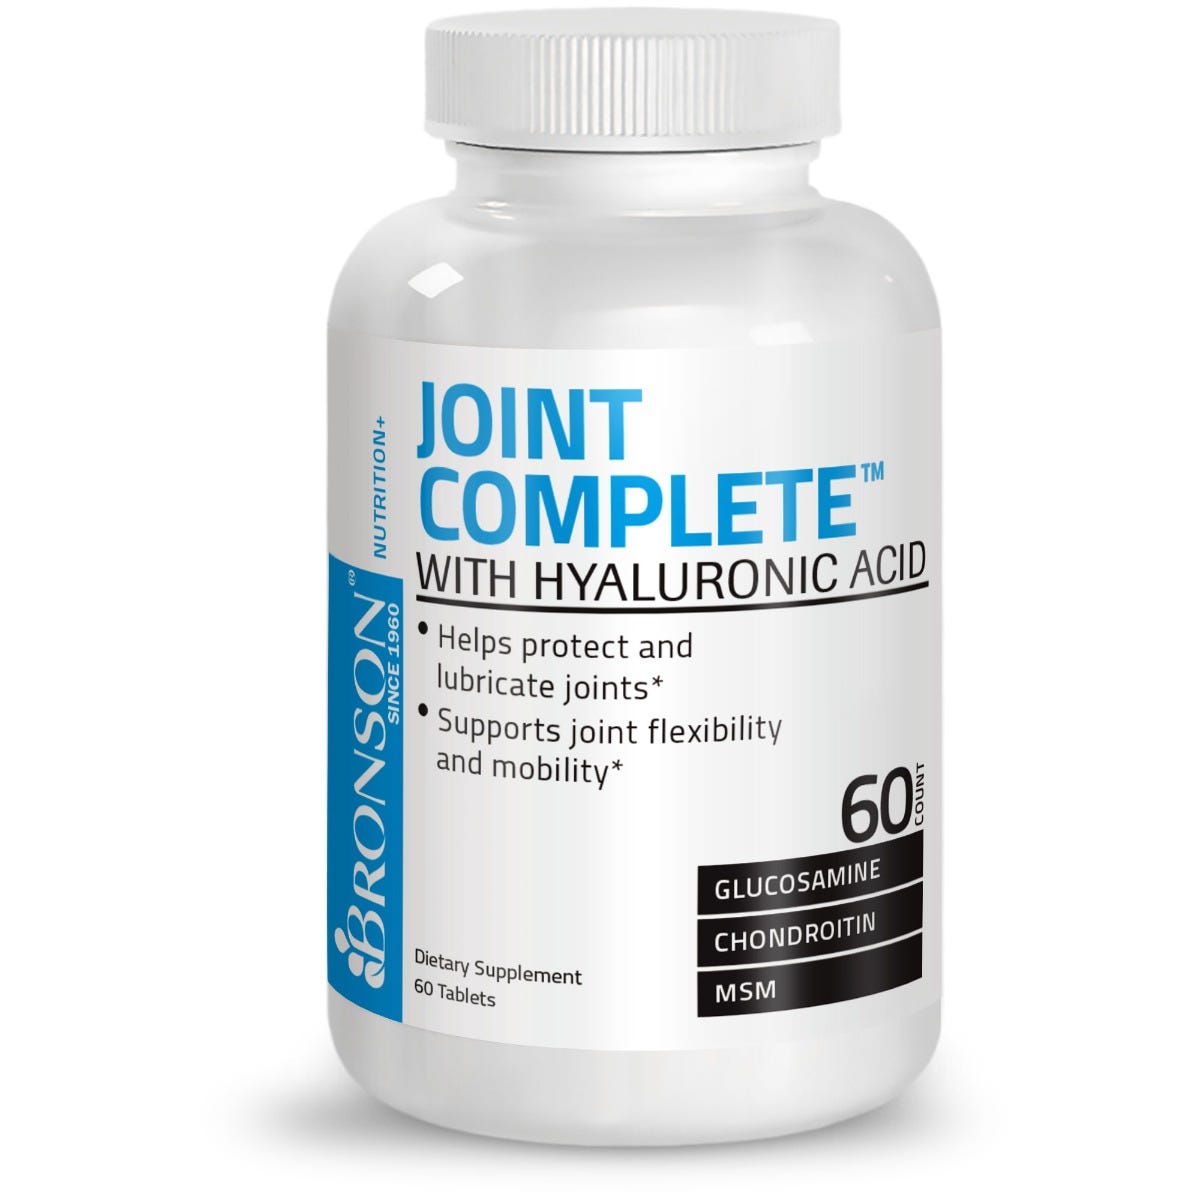 Joint Complete Formula with Hyaluronic Acid view 3 of 7